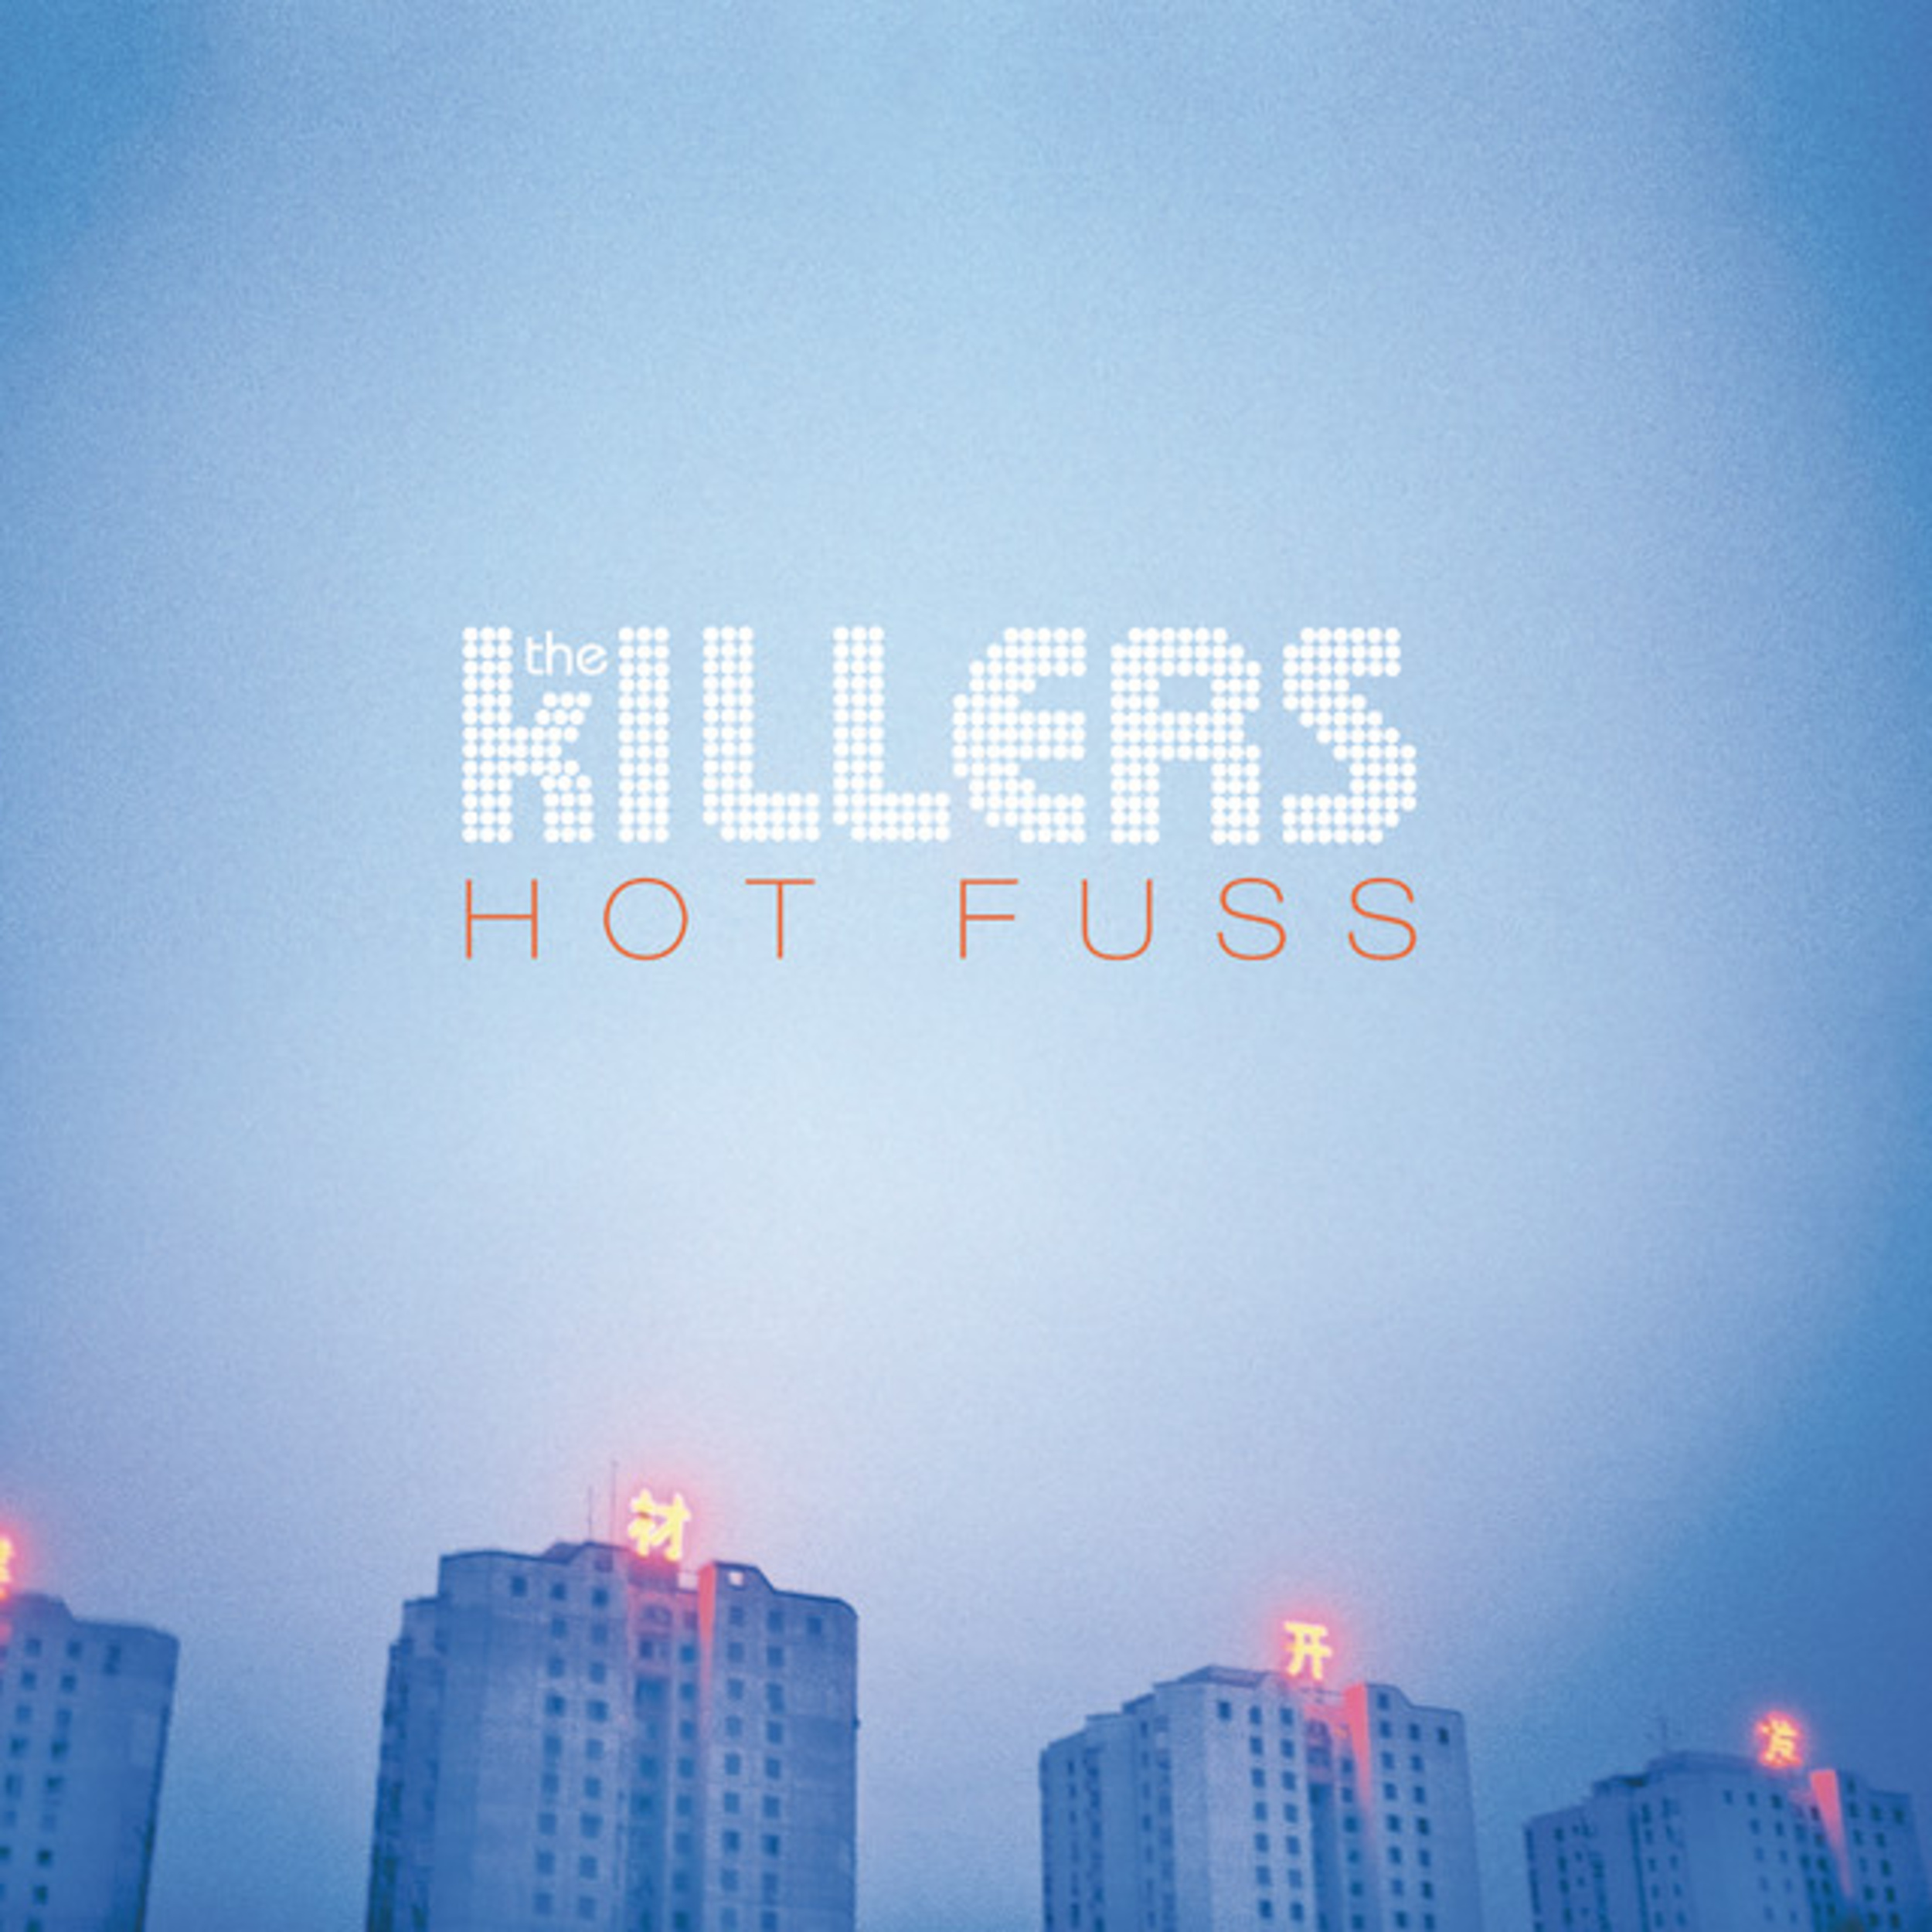 <p>Rock band The Killers came onto the scene in 2003 with their first single, <a href="https://www.youtube.com/watch?v=gGdGFtwCNBE">"Mr. Brightside,"</a> and released their debut album, <em>Hot Fuss</em>, the following summer. With their mix of alternative, punk, and new wave sound, they were able to win fans over, and <em>Hot Fuss</em> reached the top ten on the <em>Billboard</em> 200. </p><p><a href='https://www.msn.com/en-us/community/channel/vid-cj9pqbr0vn9in2b6ddcd8sfgpfq6x6utp44fssrv6mc2gtybw0us'>Follow us on MSN to see more of our exclusive entertainment content.</a></p>